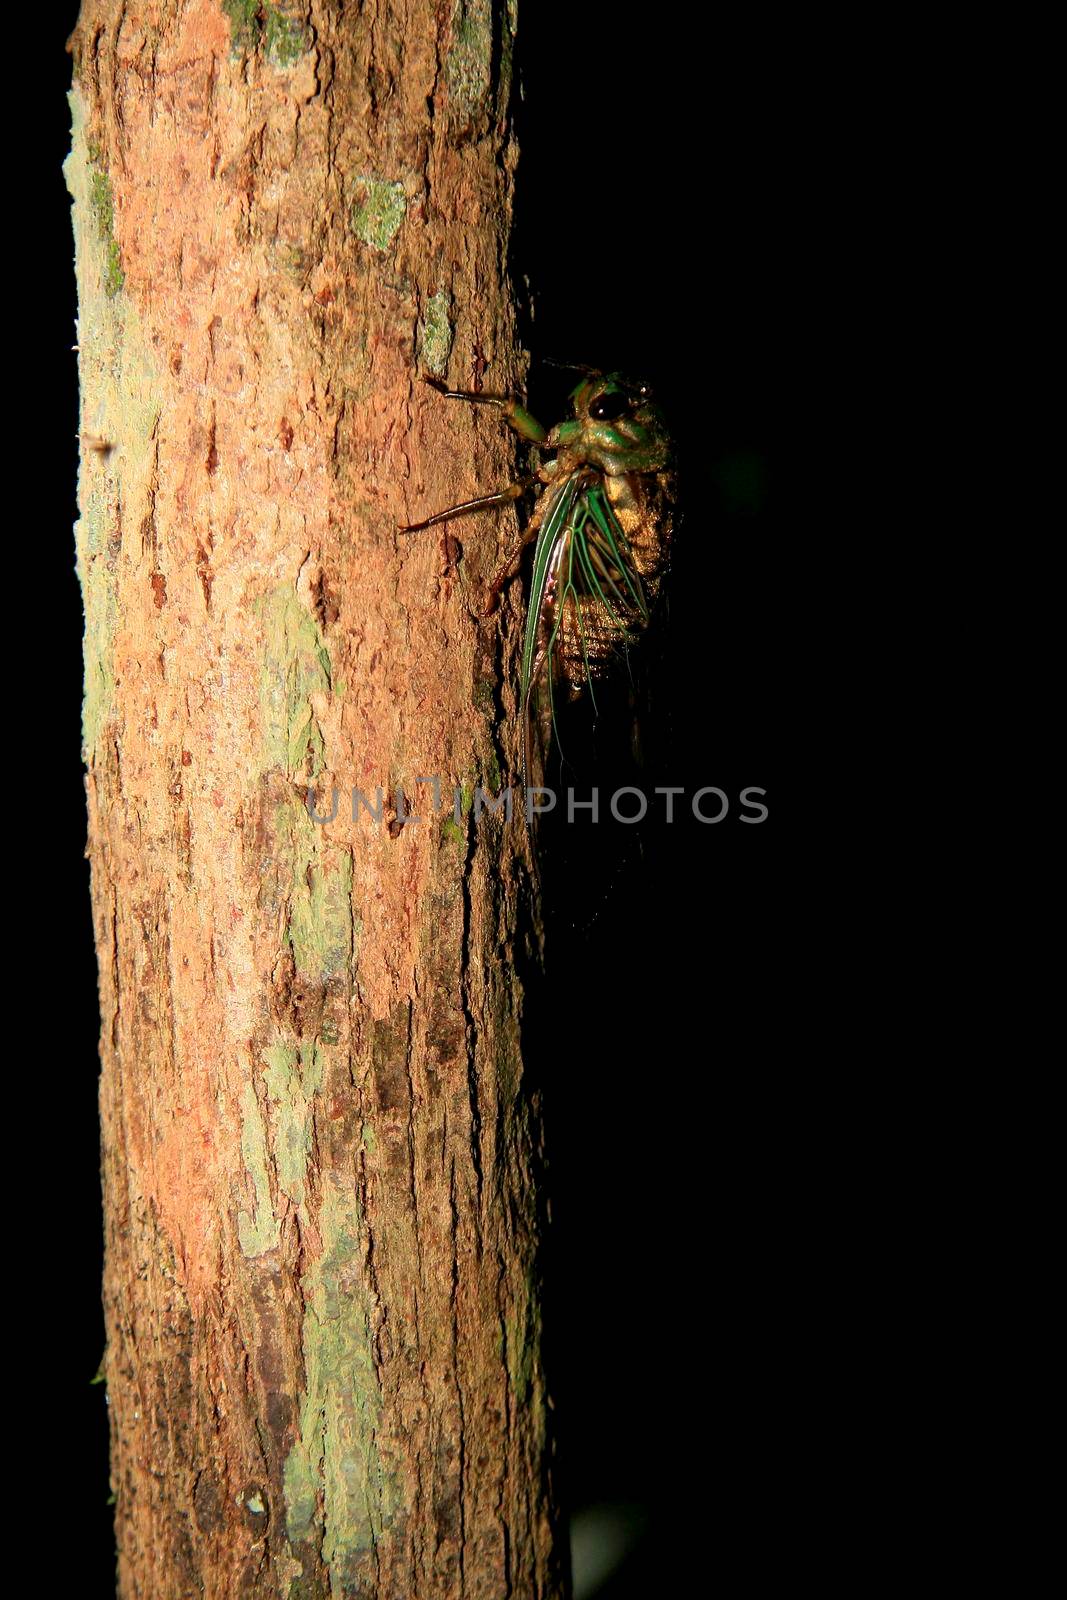 salvador, bahia / brazil - march 28, 2009: cicada insect is seen on a tree in the city of Salvador.

